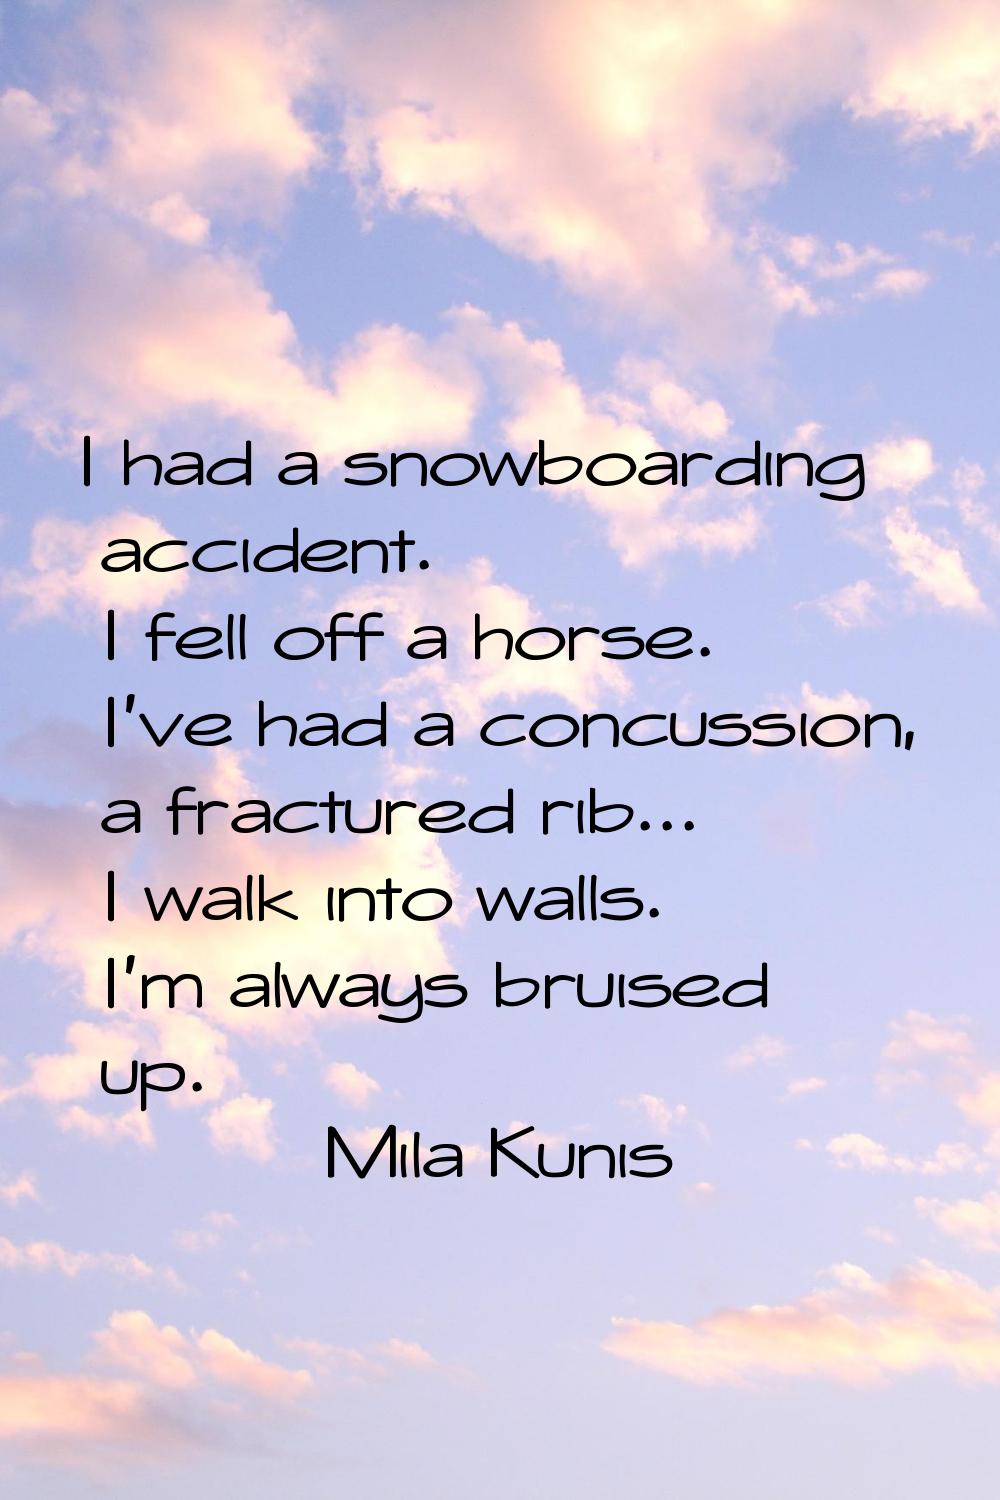 I had a snowboarding accident. I fell off a horse. I've had a concussion, a fractured rib... I walk